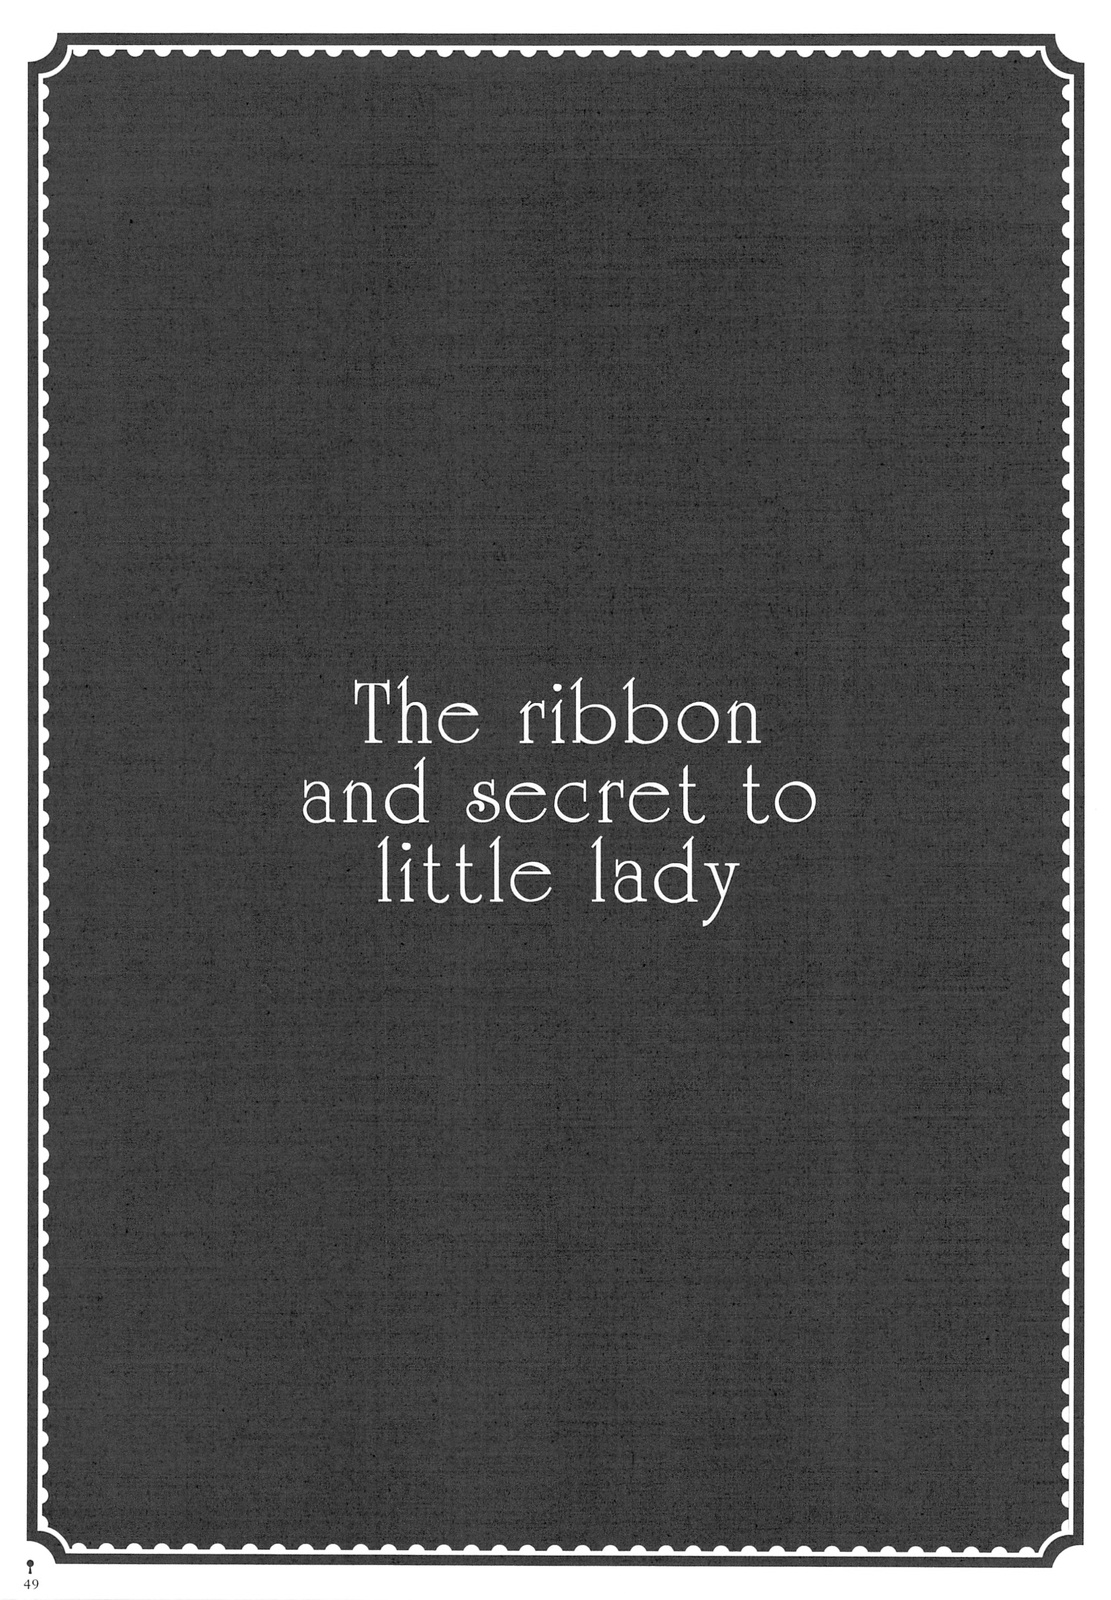 (C76) [D・N・A.Lab., ふるり。 (ミヤスリサ, ヒナユキウサ)] The ribbon and secret to little lady